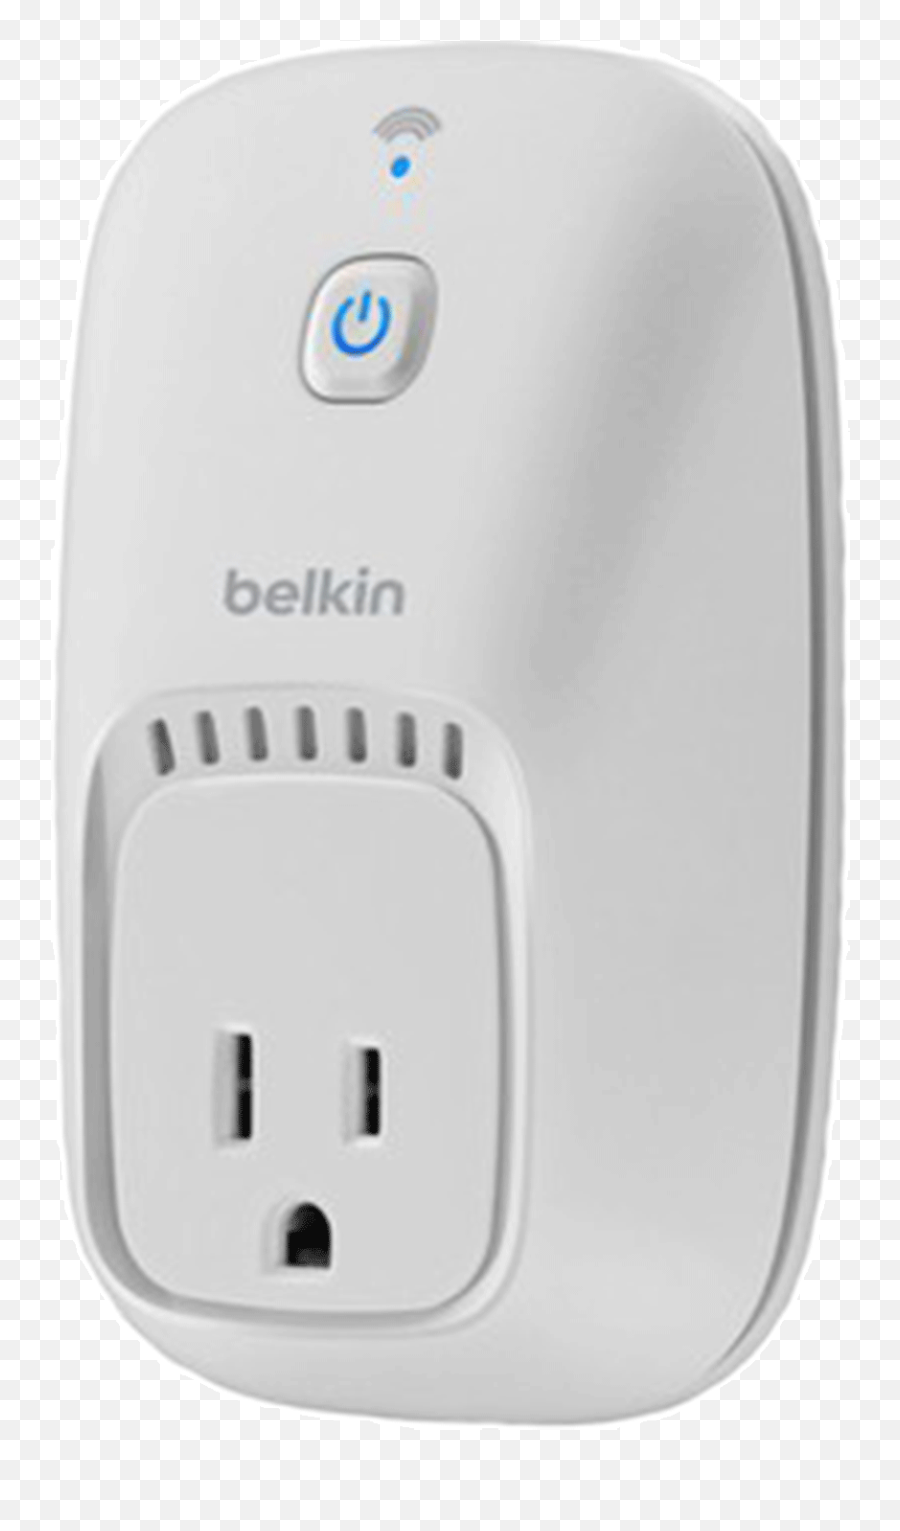 Turn Your Christmas Lights On Or Your Curling Iron Off With - Belkin Emoji,Curling Emoji